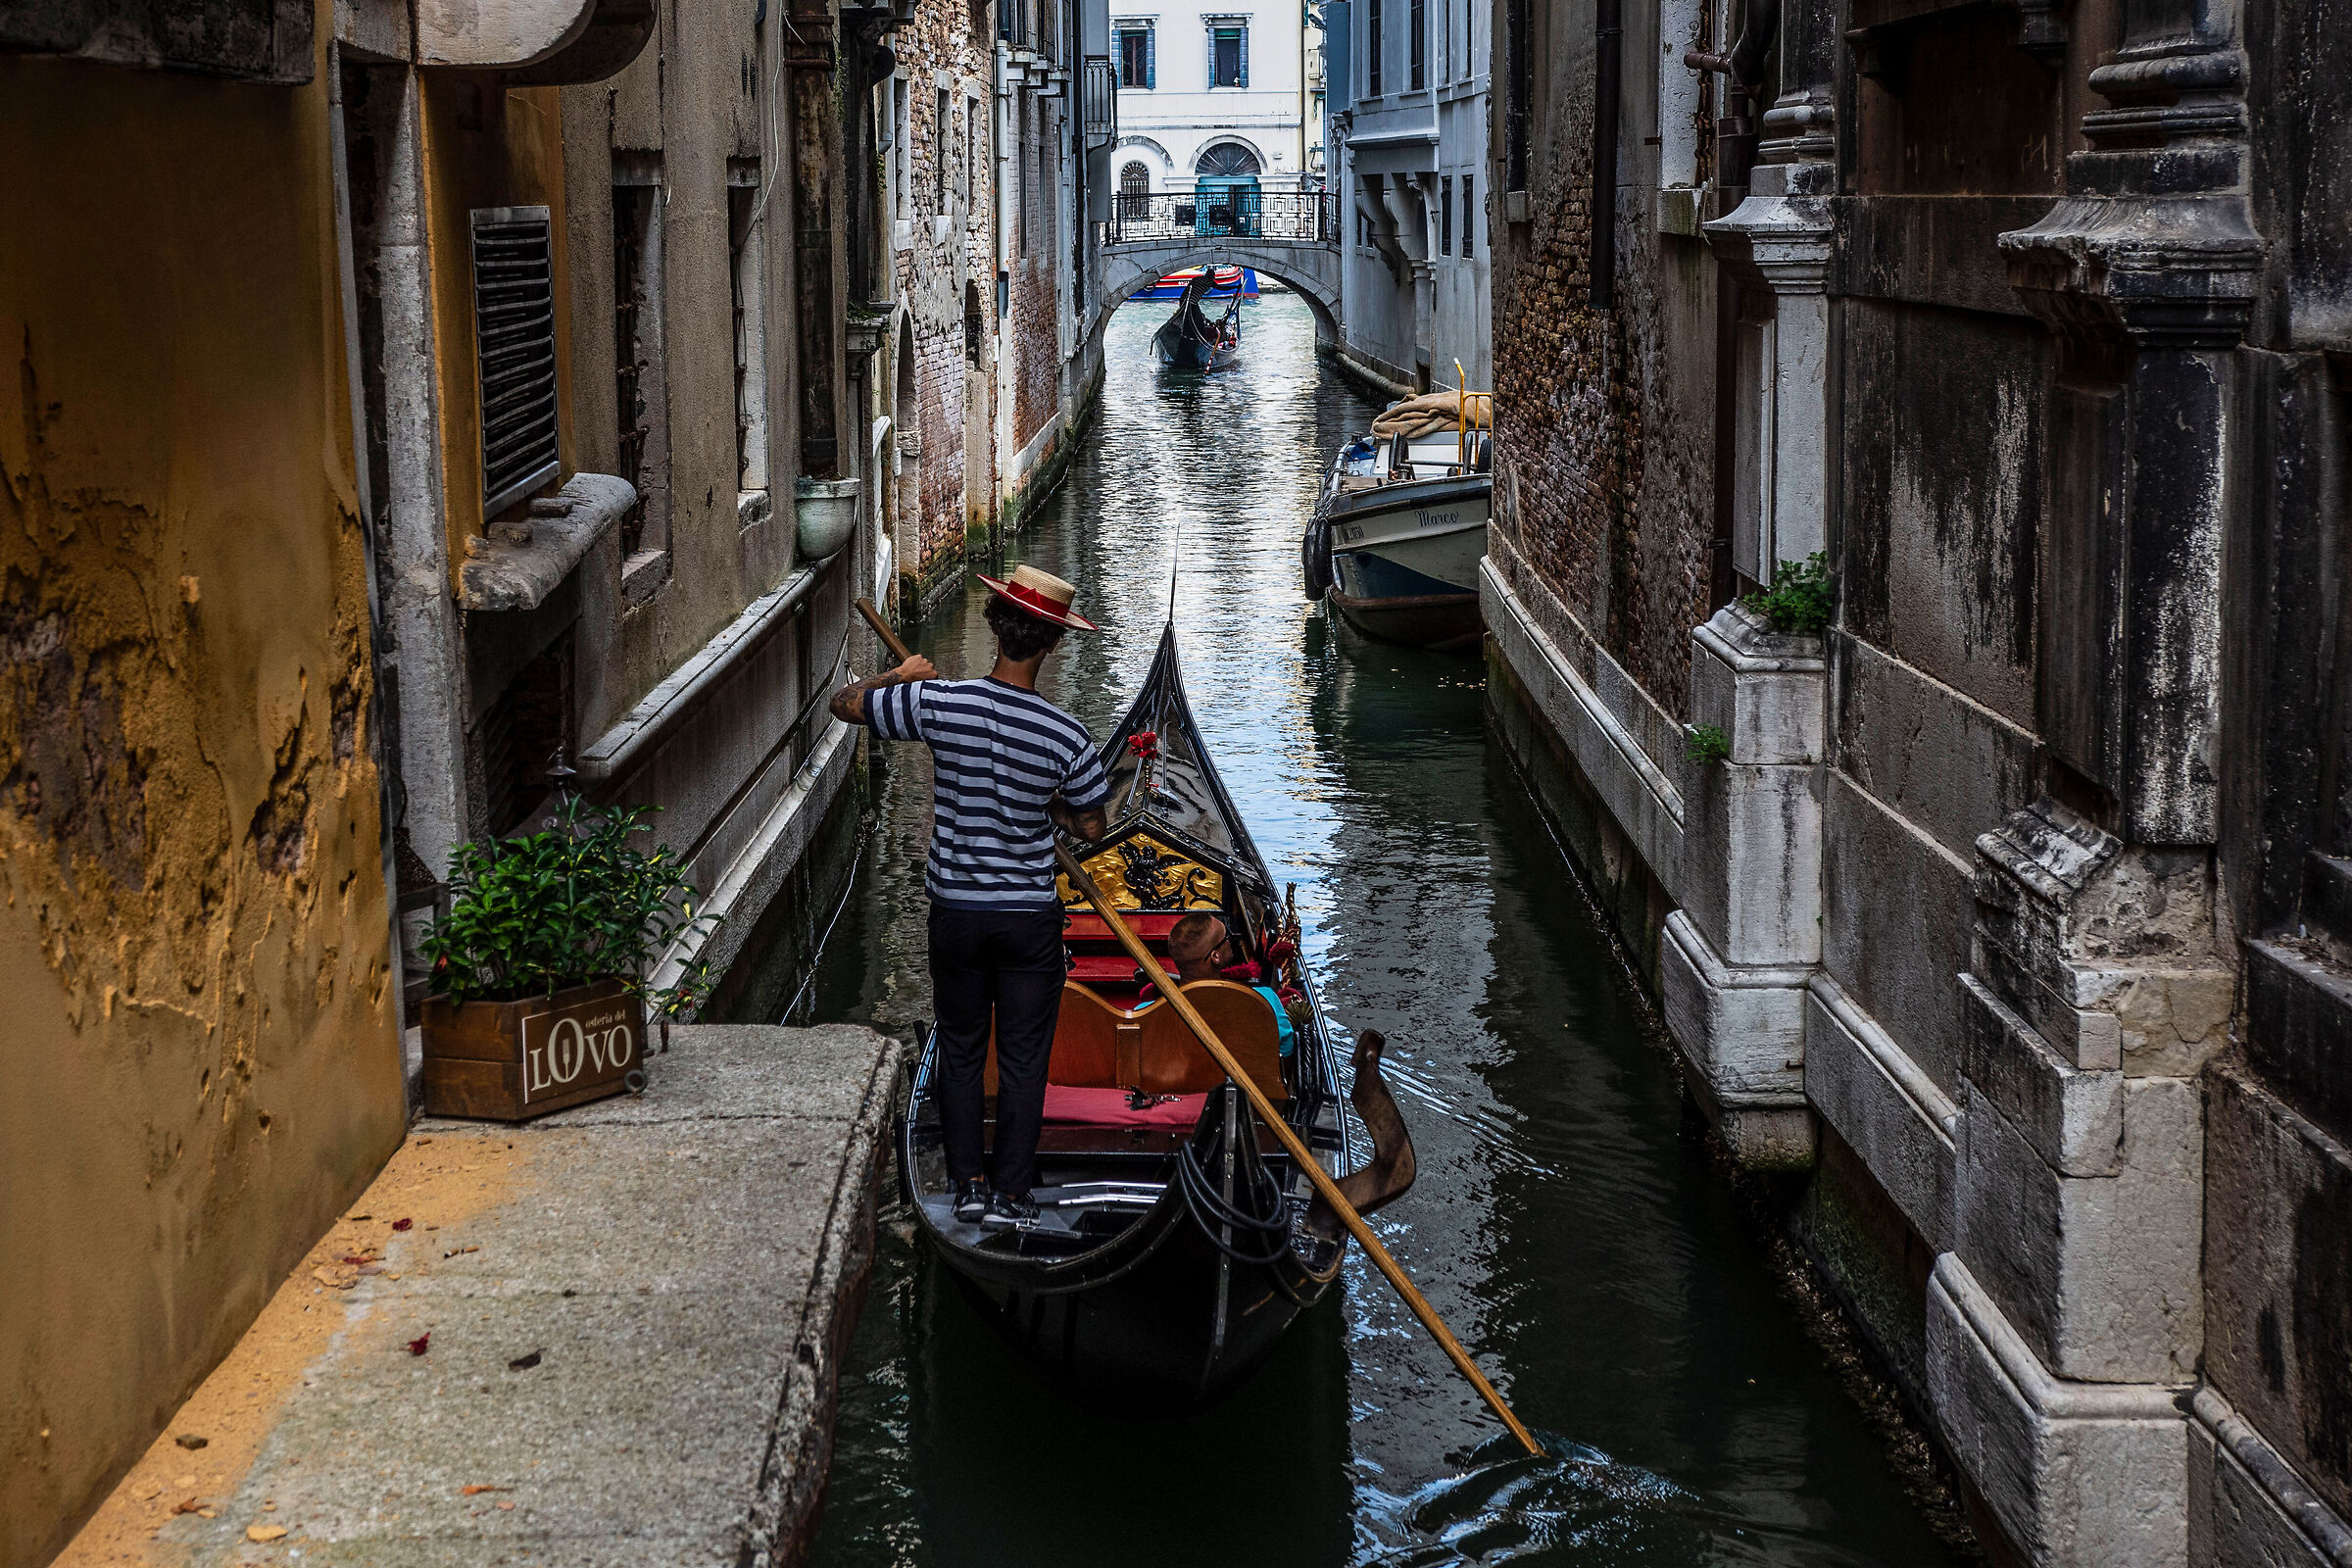 the gondolier...